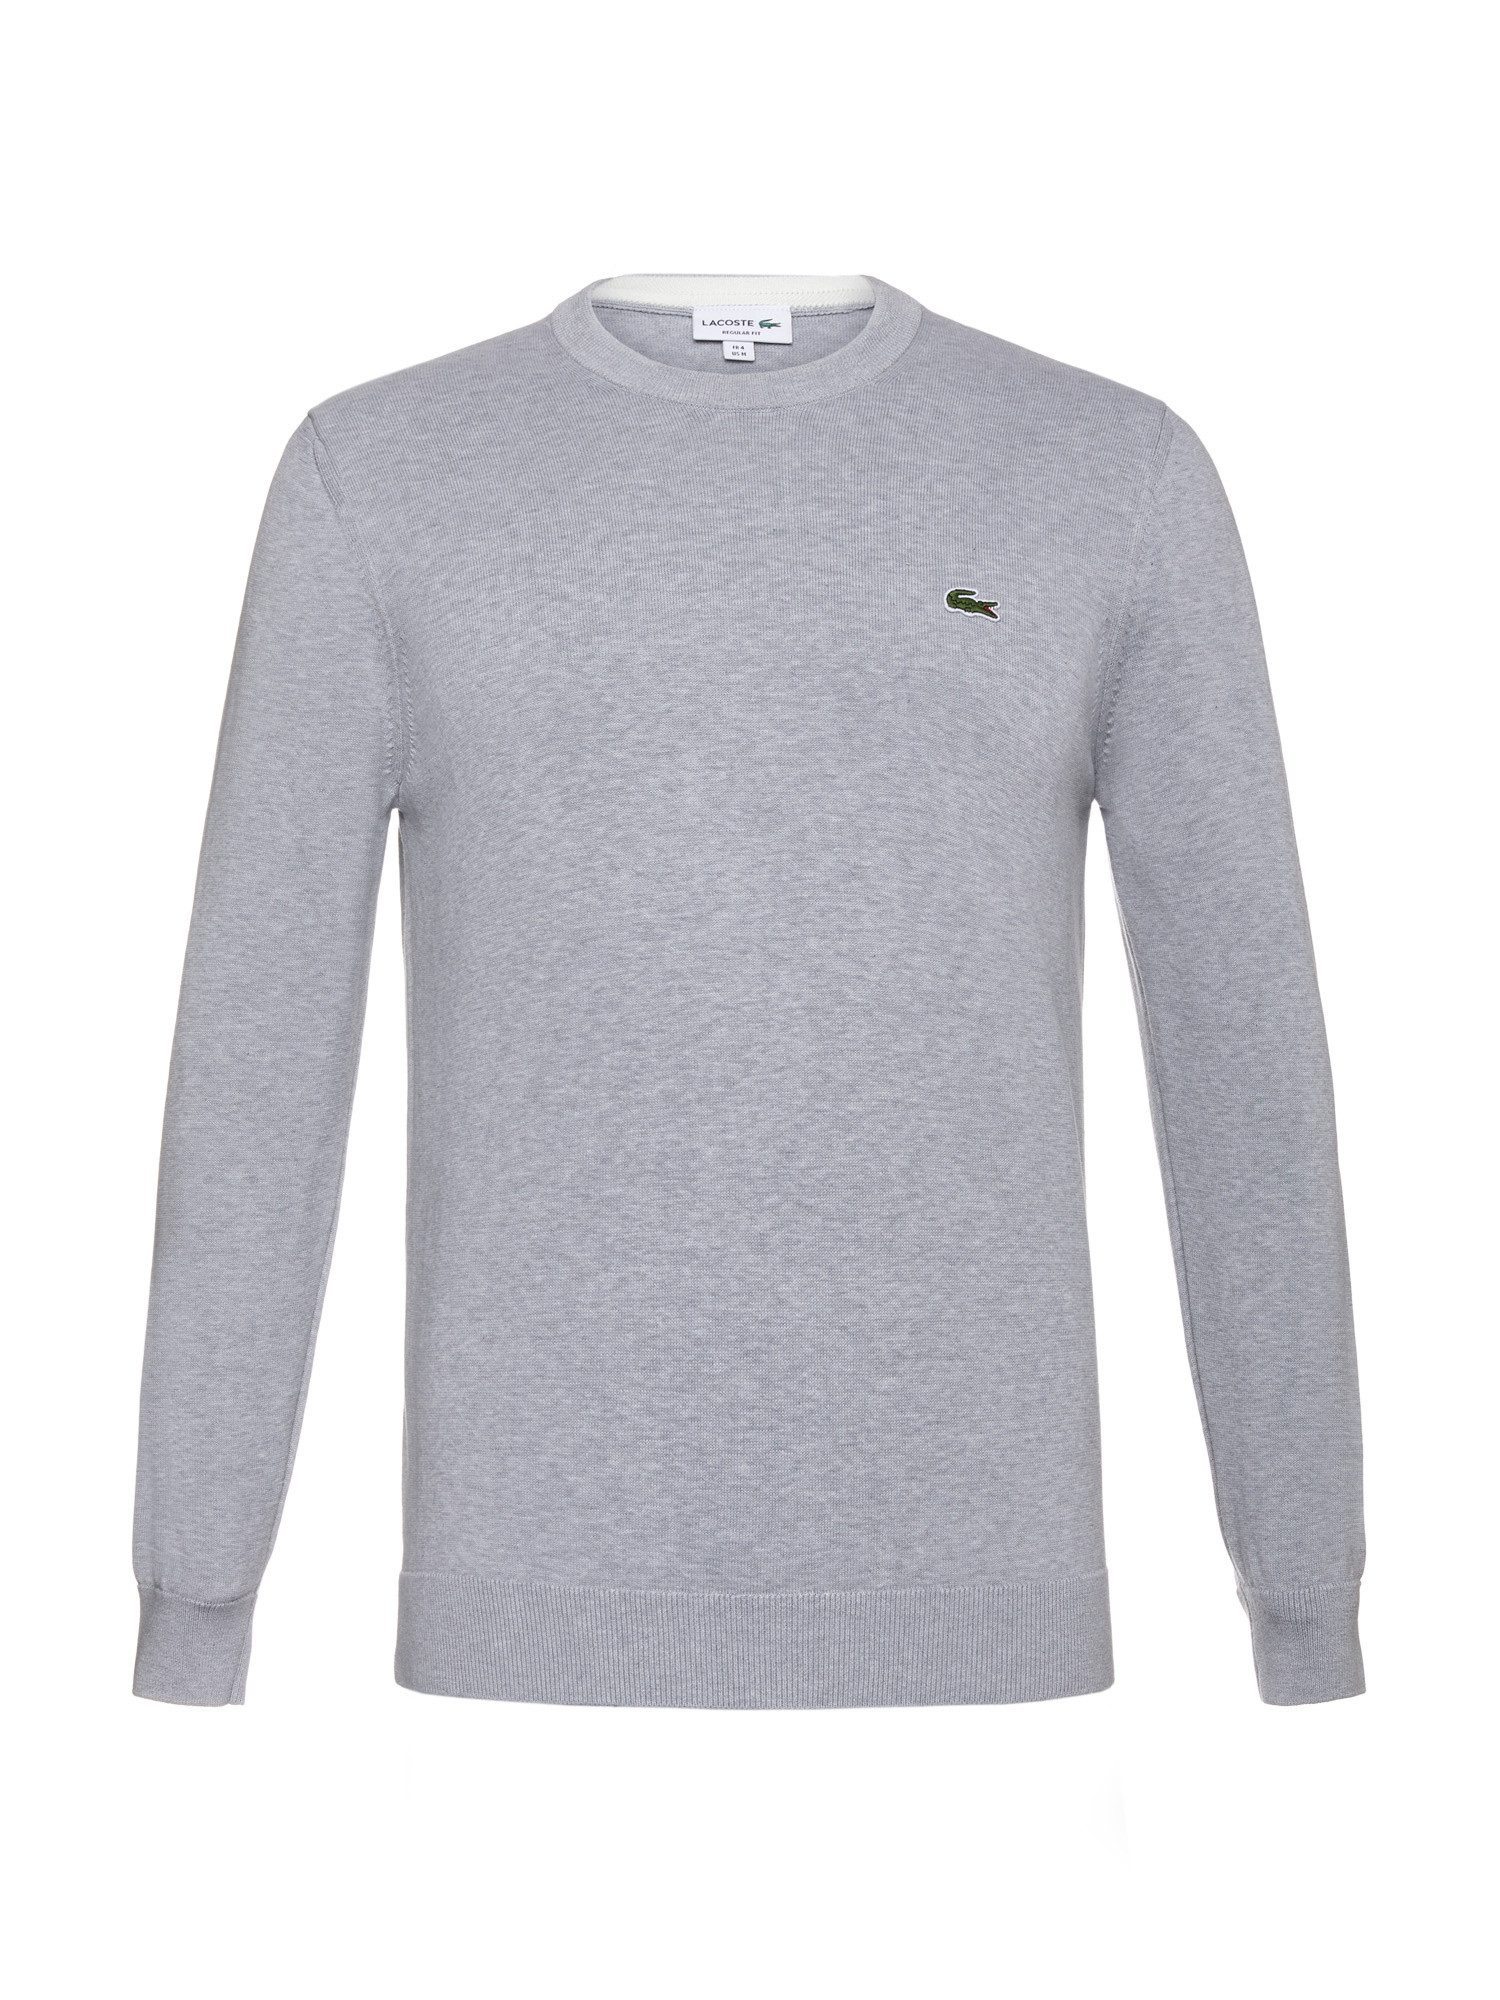 Lacoste - Organic cotton pullover, Light Grey, large image number 0